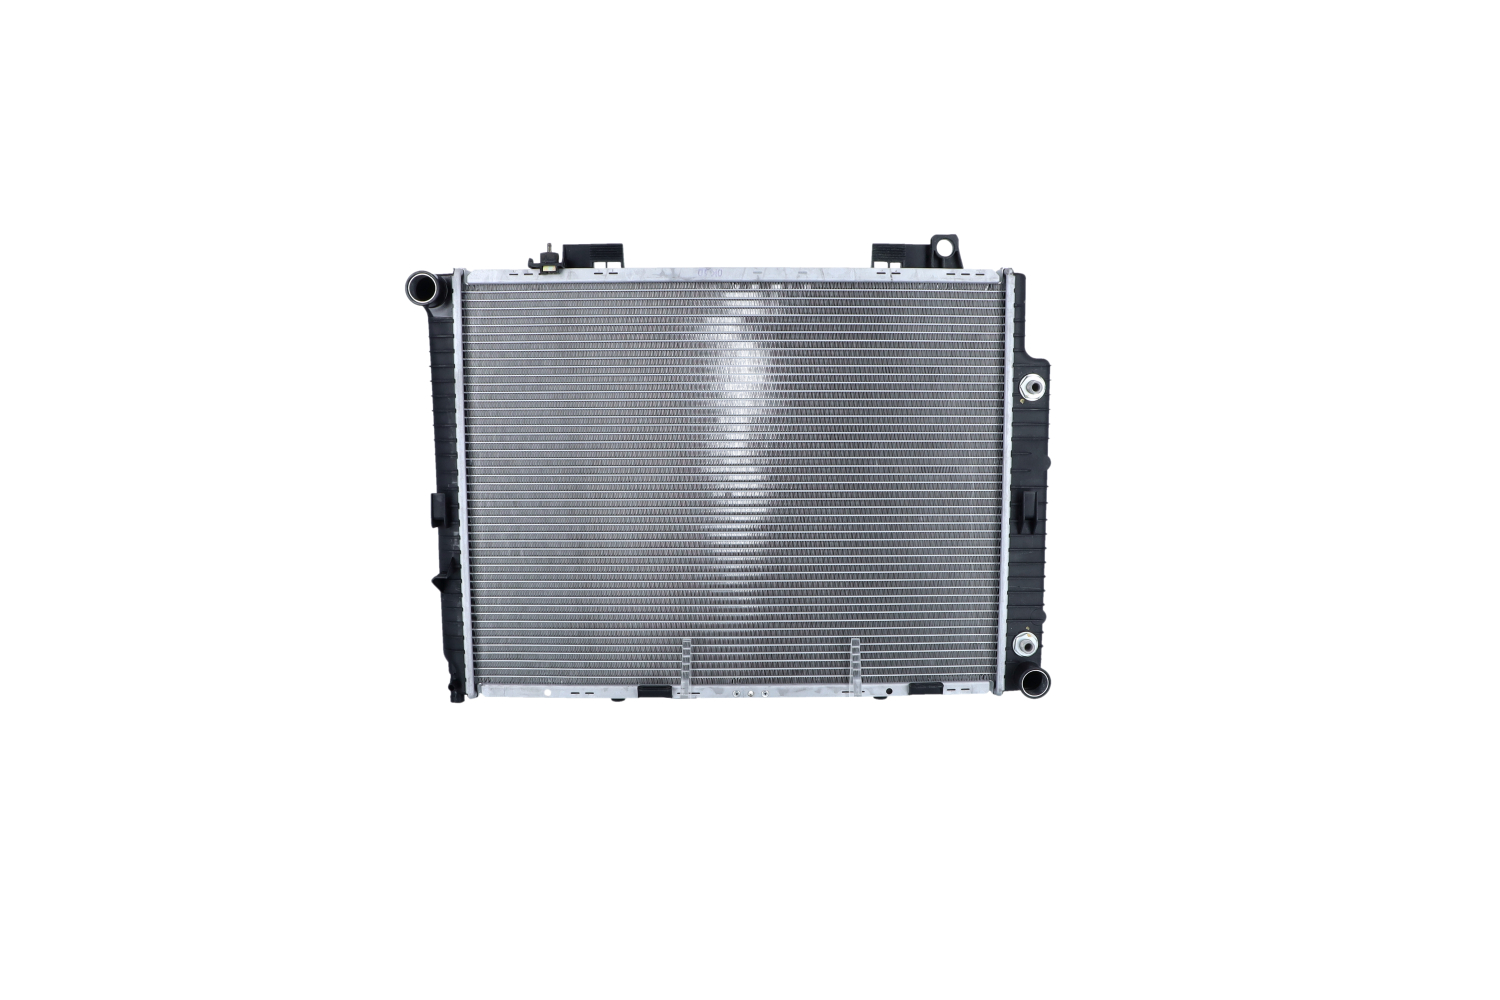 NRF 53945 Engine radiator Aluminium, 640 x 485 x 24 mm, with mounting parts, Brazed cooling fins